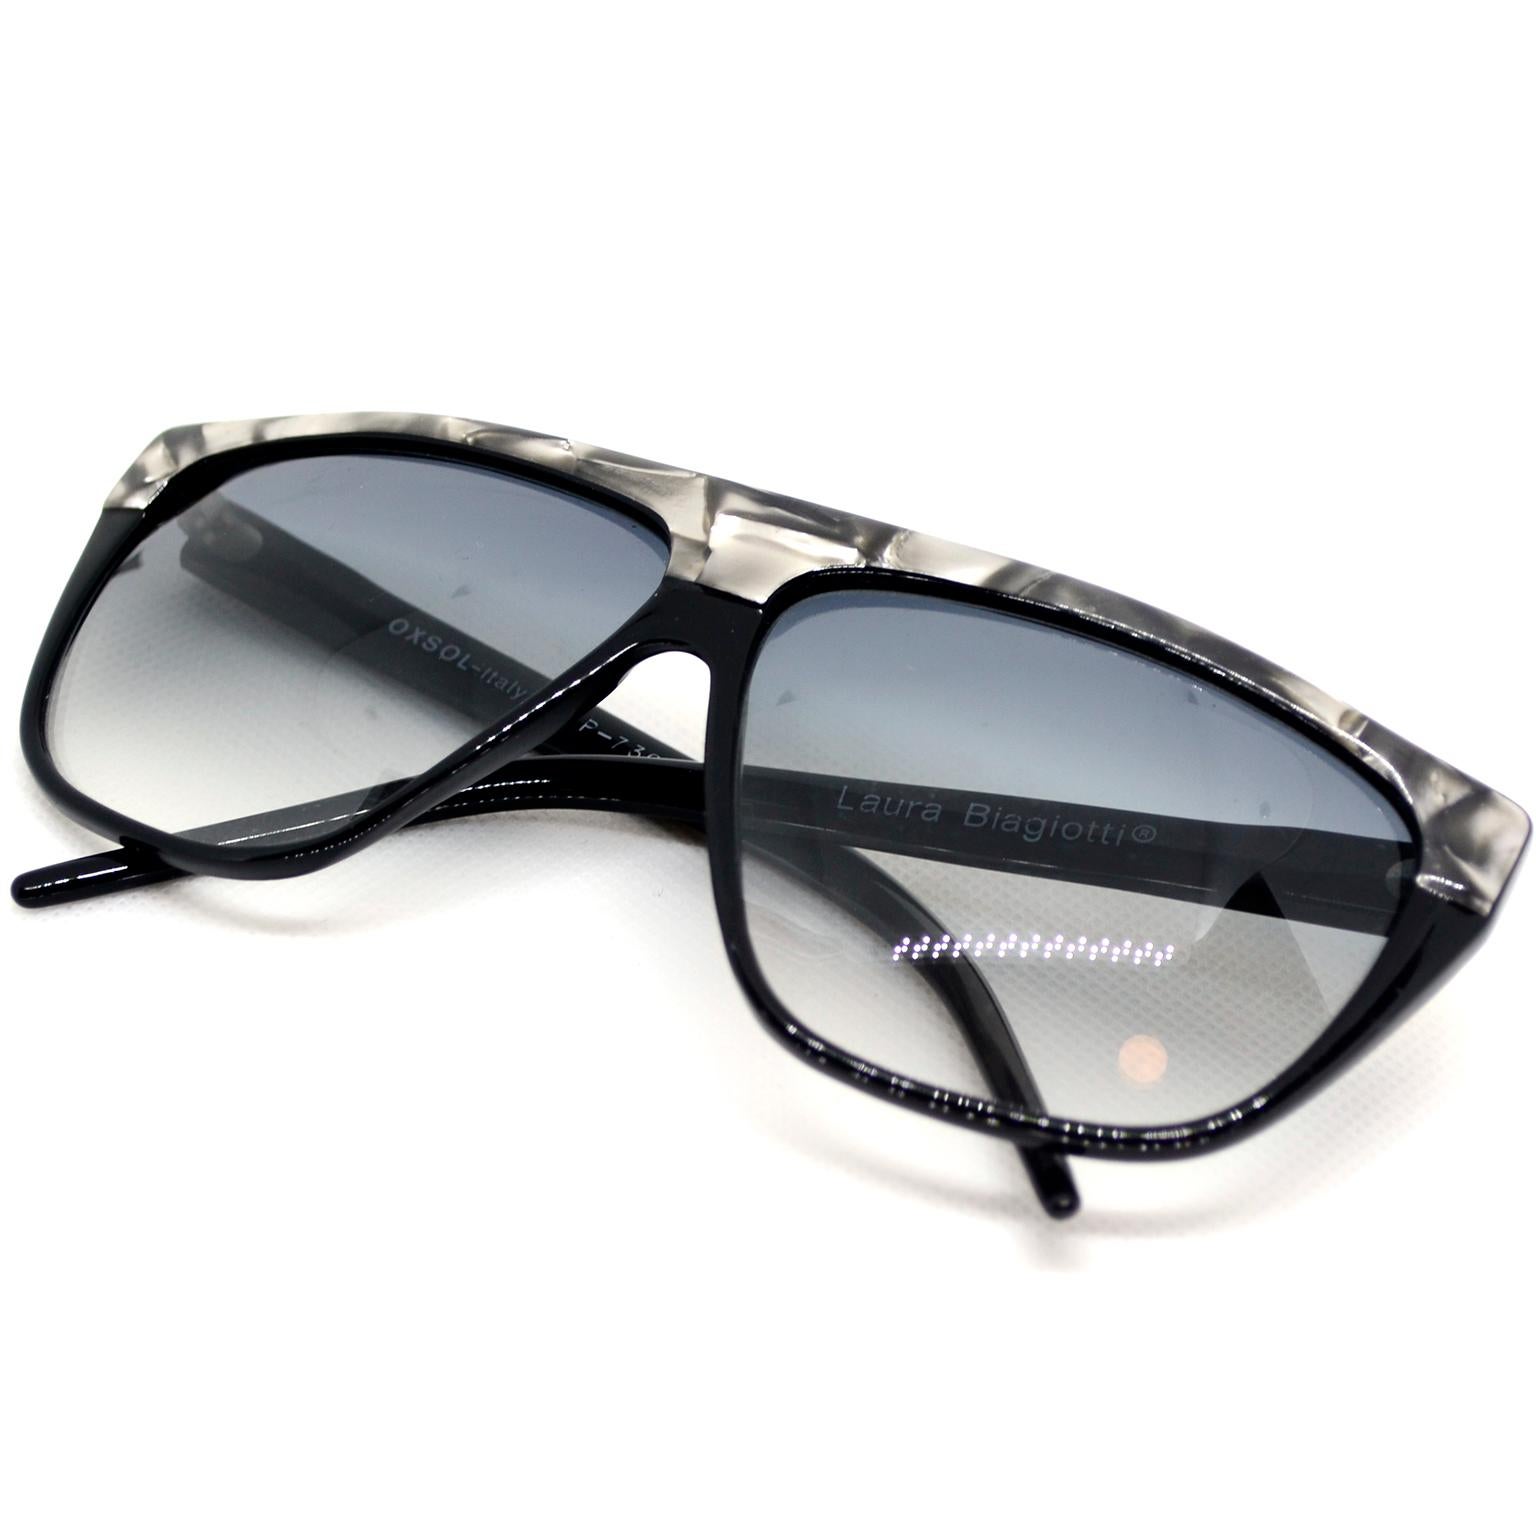 Laura Biagiotti Black and Silver Marbled Vintage Sunglasses In Good Condition For Sale In Portland, OR